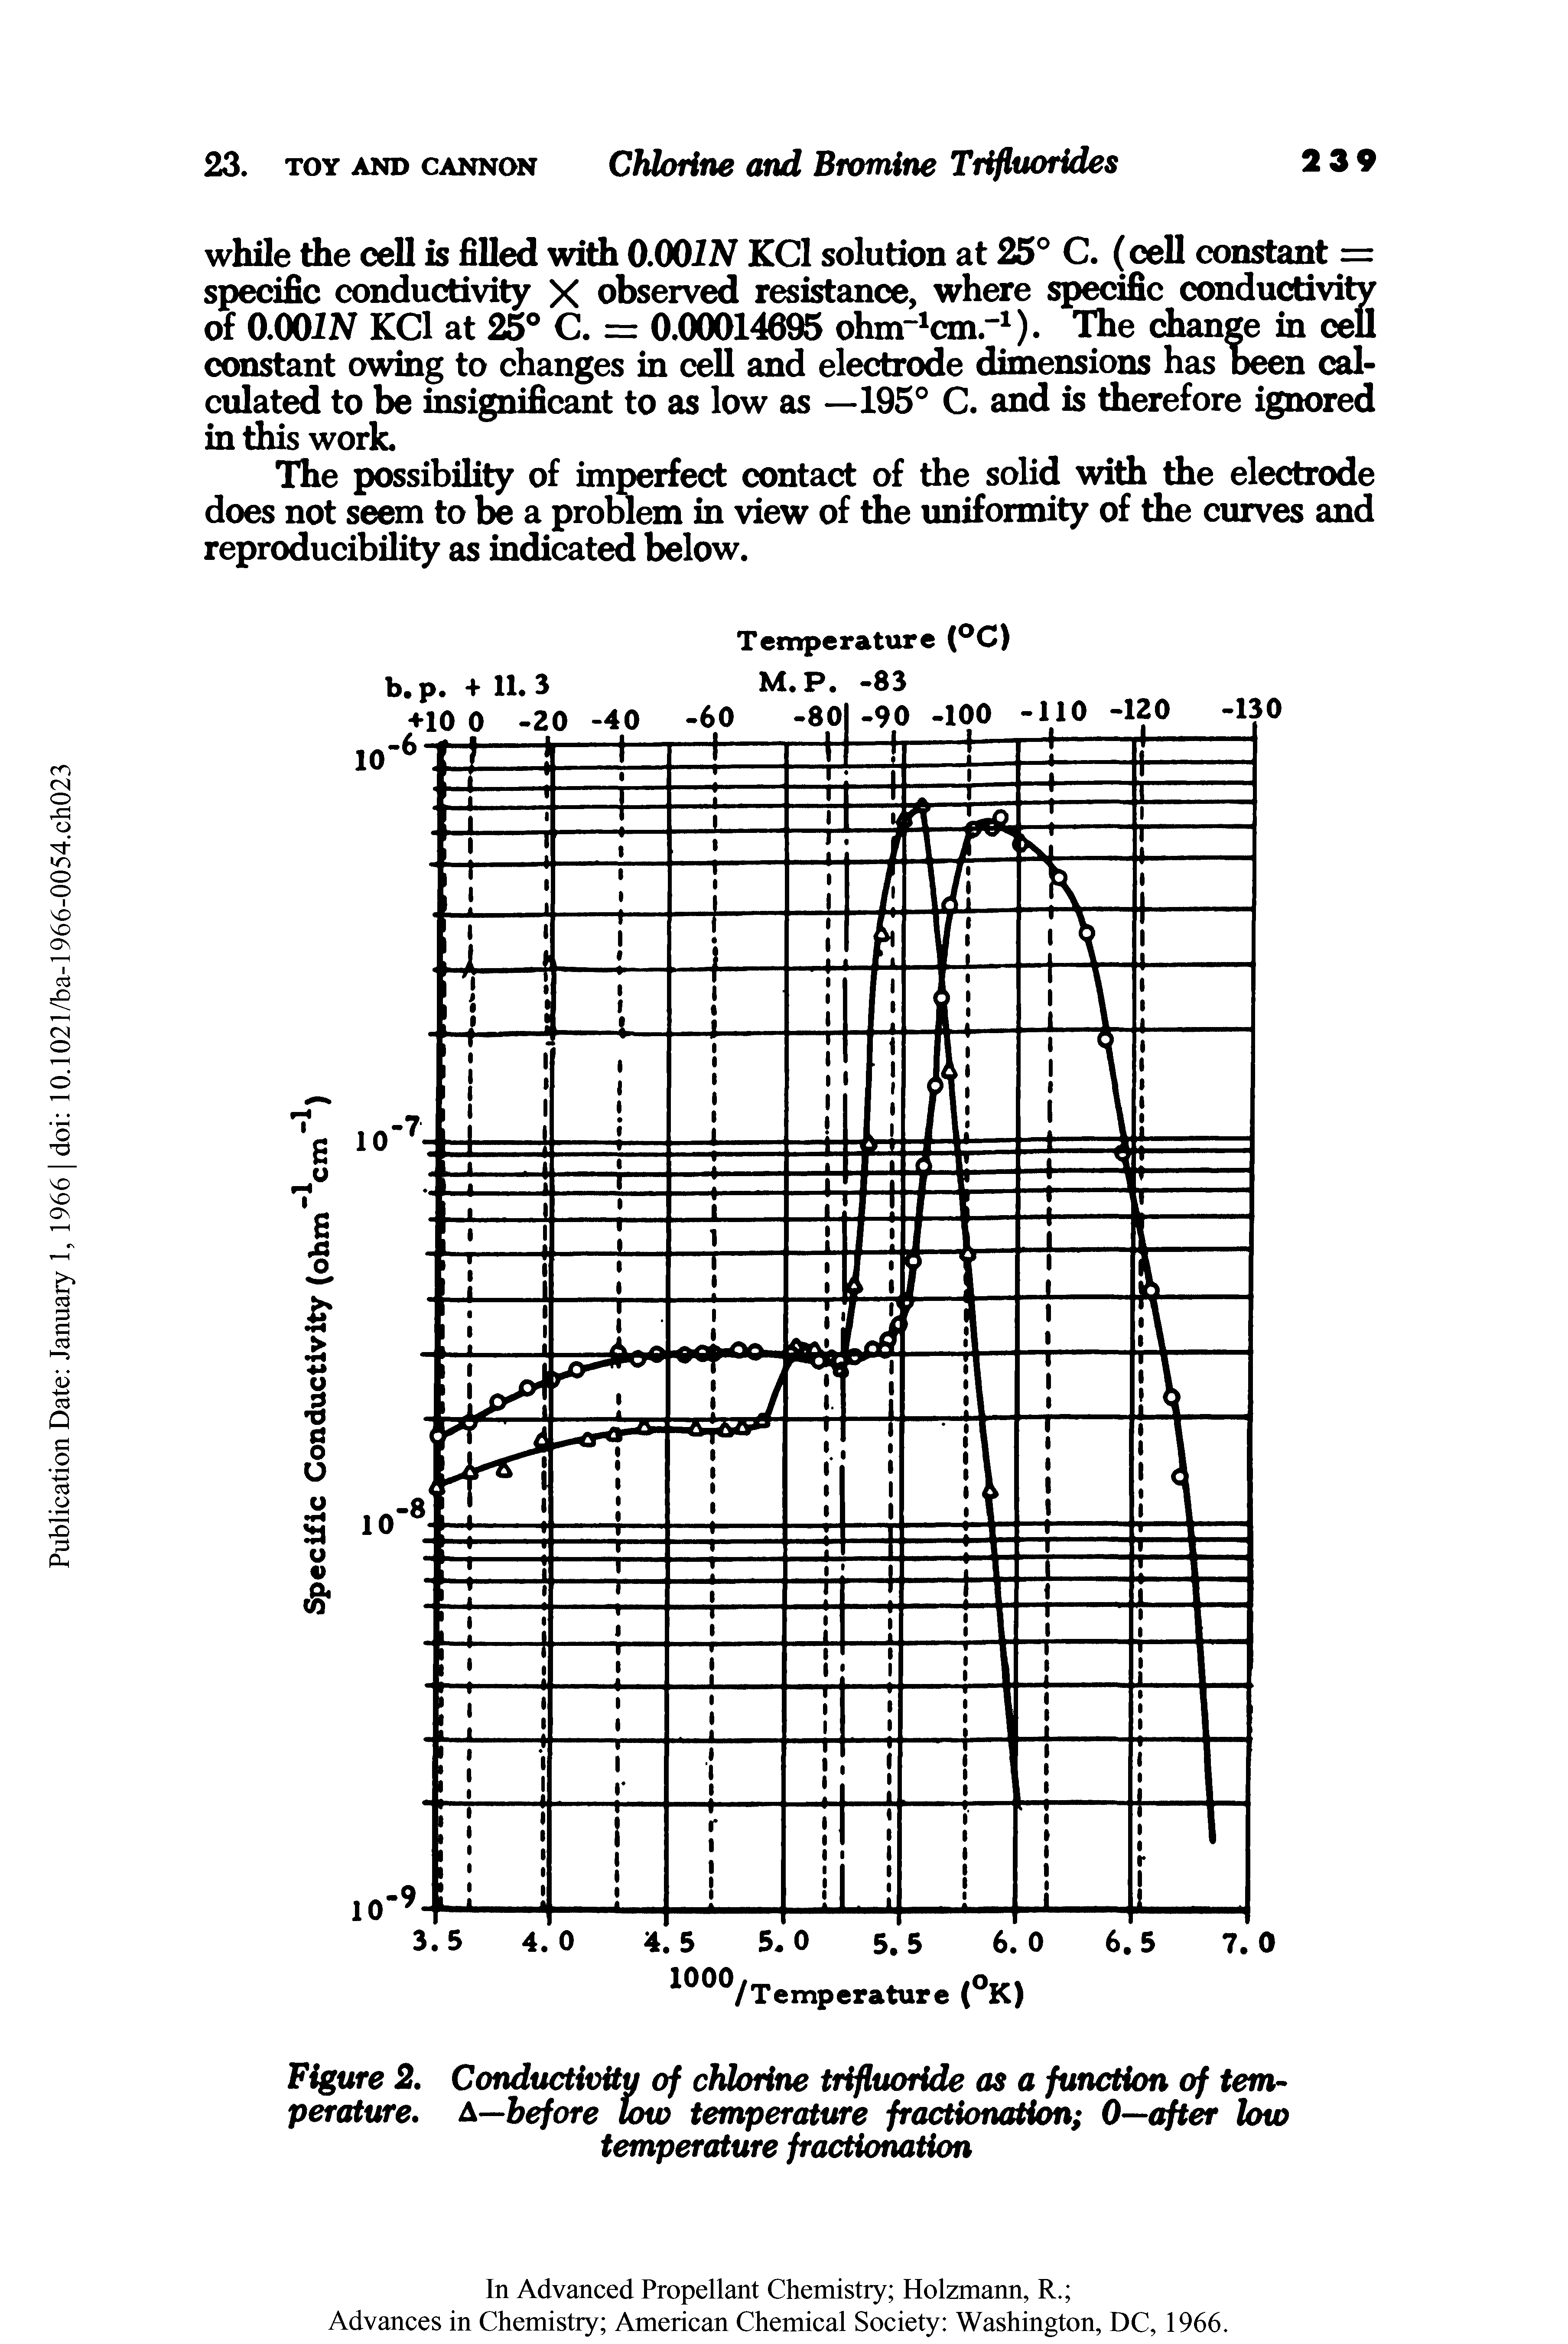 Figure 2. Conductivity of chlorine trifluoride as a function of temperature. A—before tow temperature fractionation 0—after low temperature fractionation...